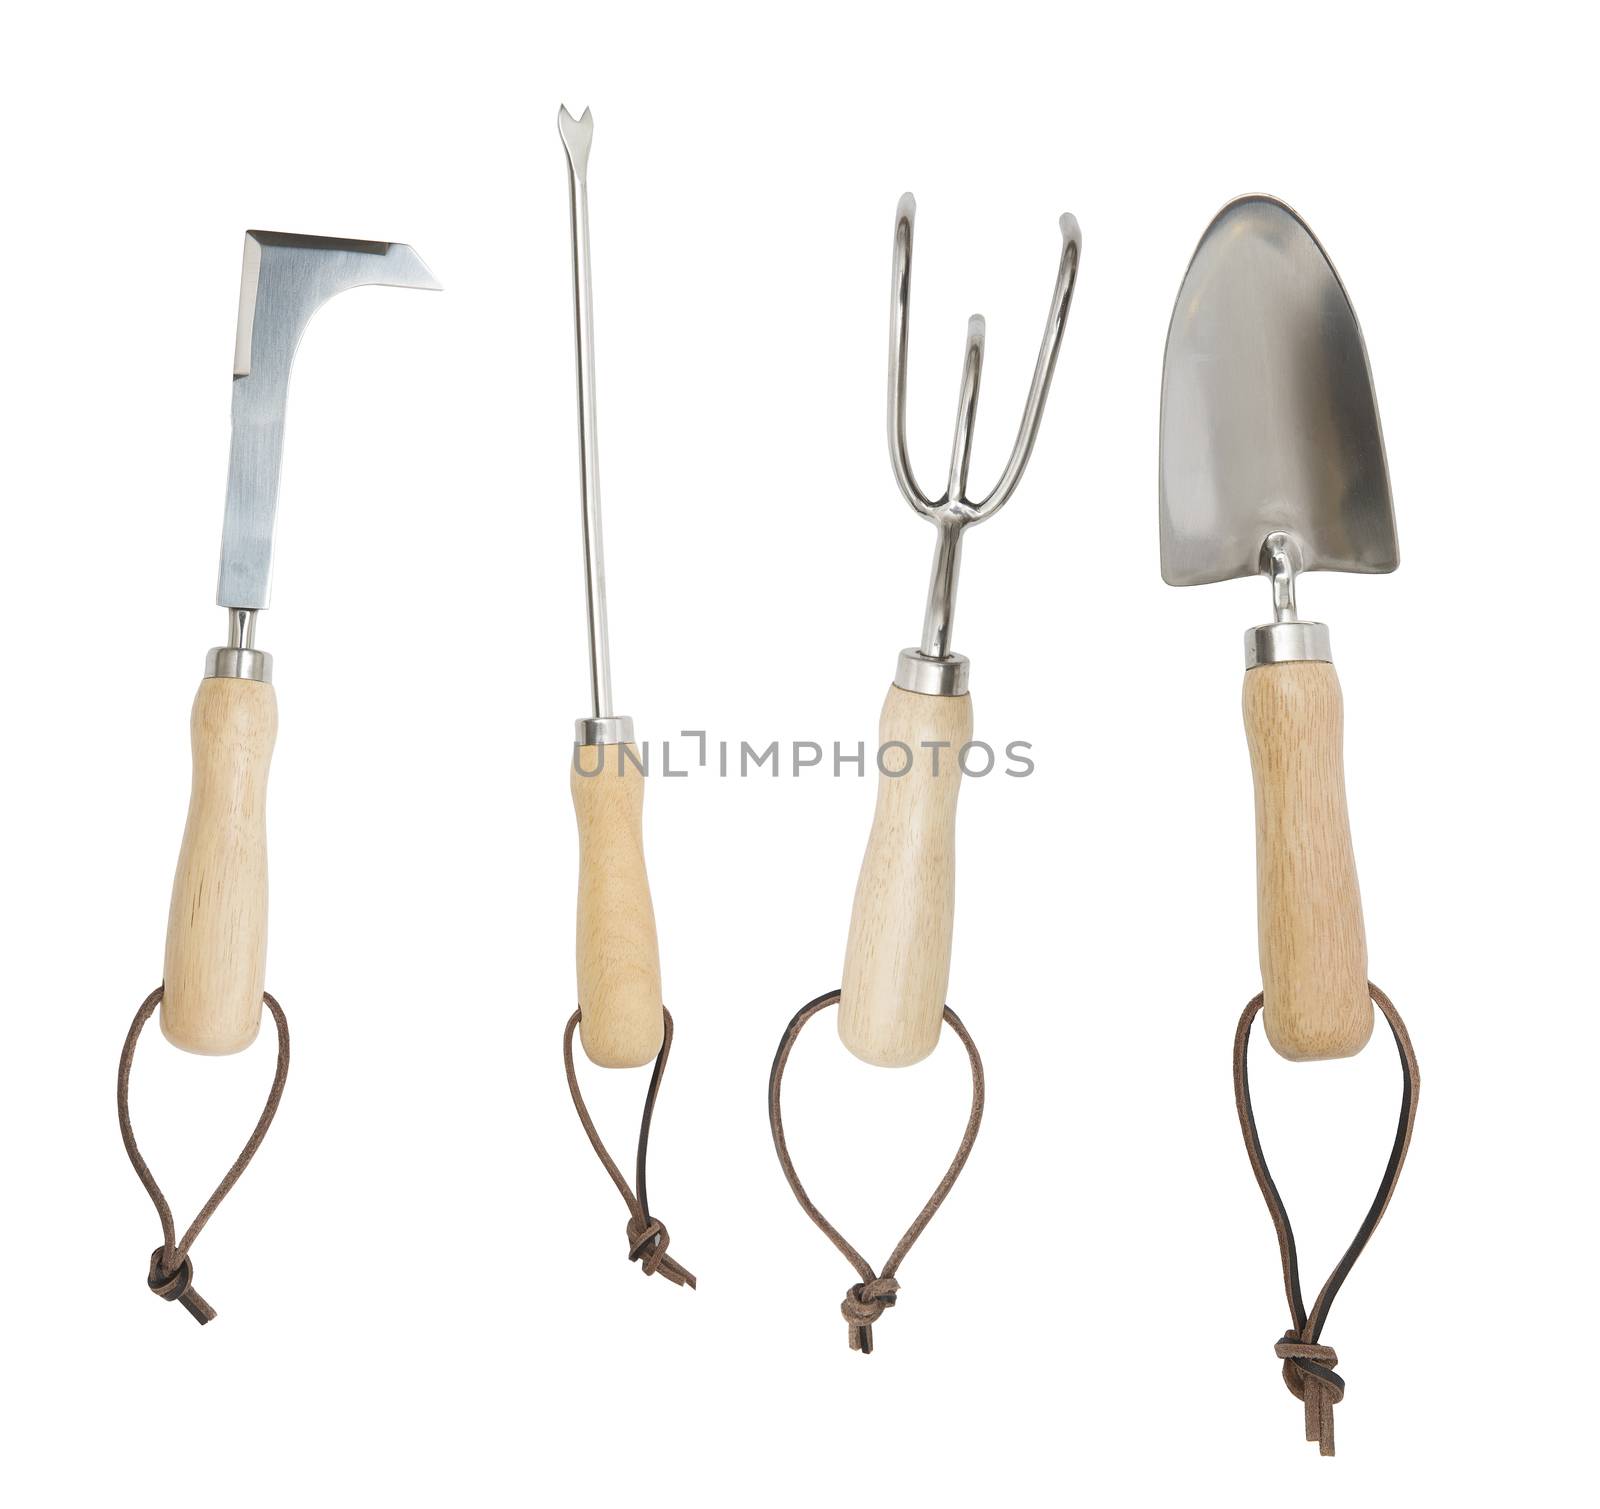 Group of Gardening Tools isolated on white background